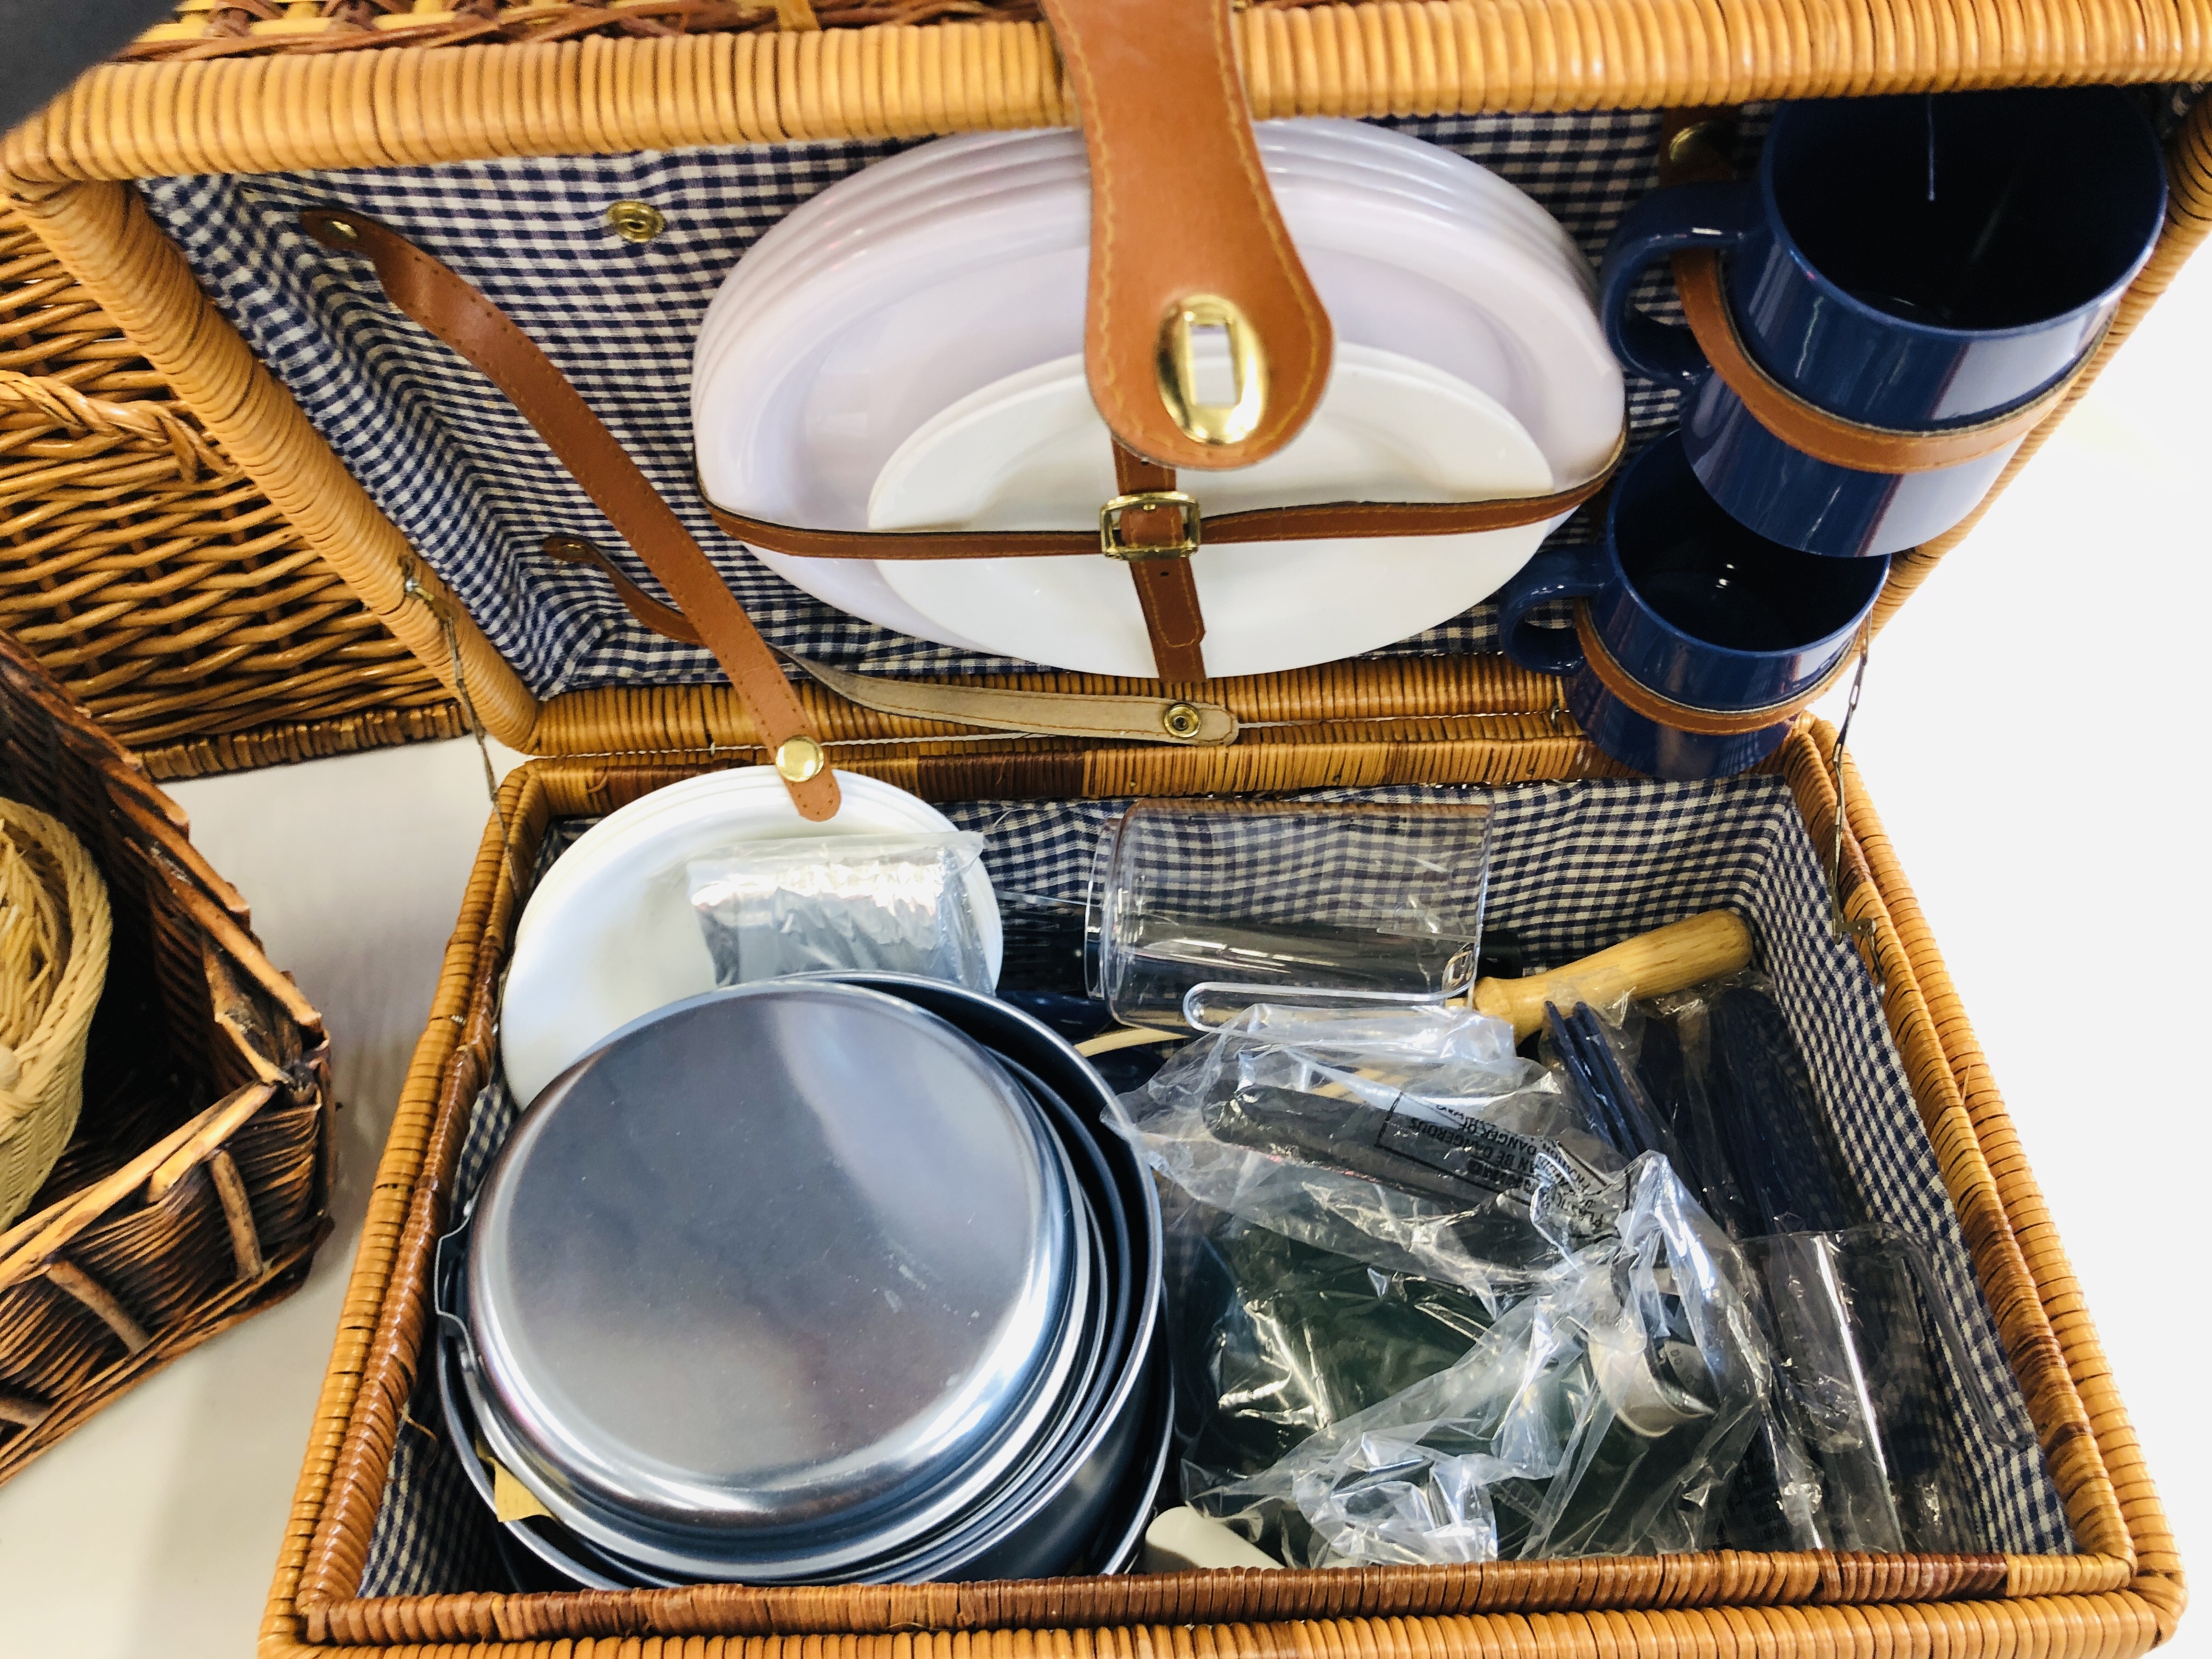 A COLLECTION OF 12 WICKER BASKETS AND HAMPERS ALONG WITH A FURTHER INCOMPLETE PICNIC HAMPER. - Image 3 of 6